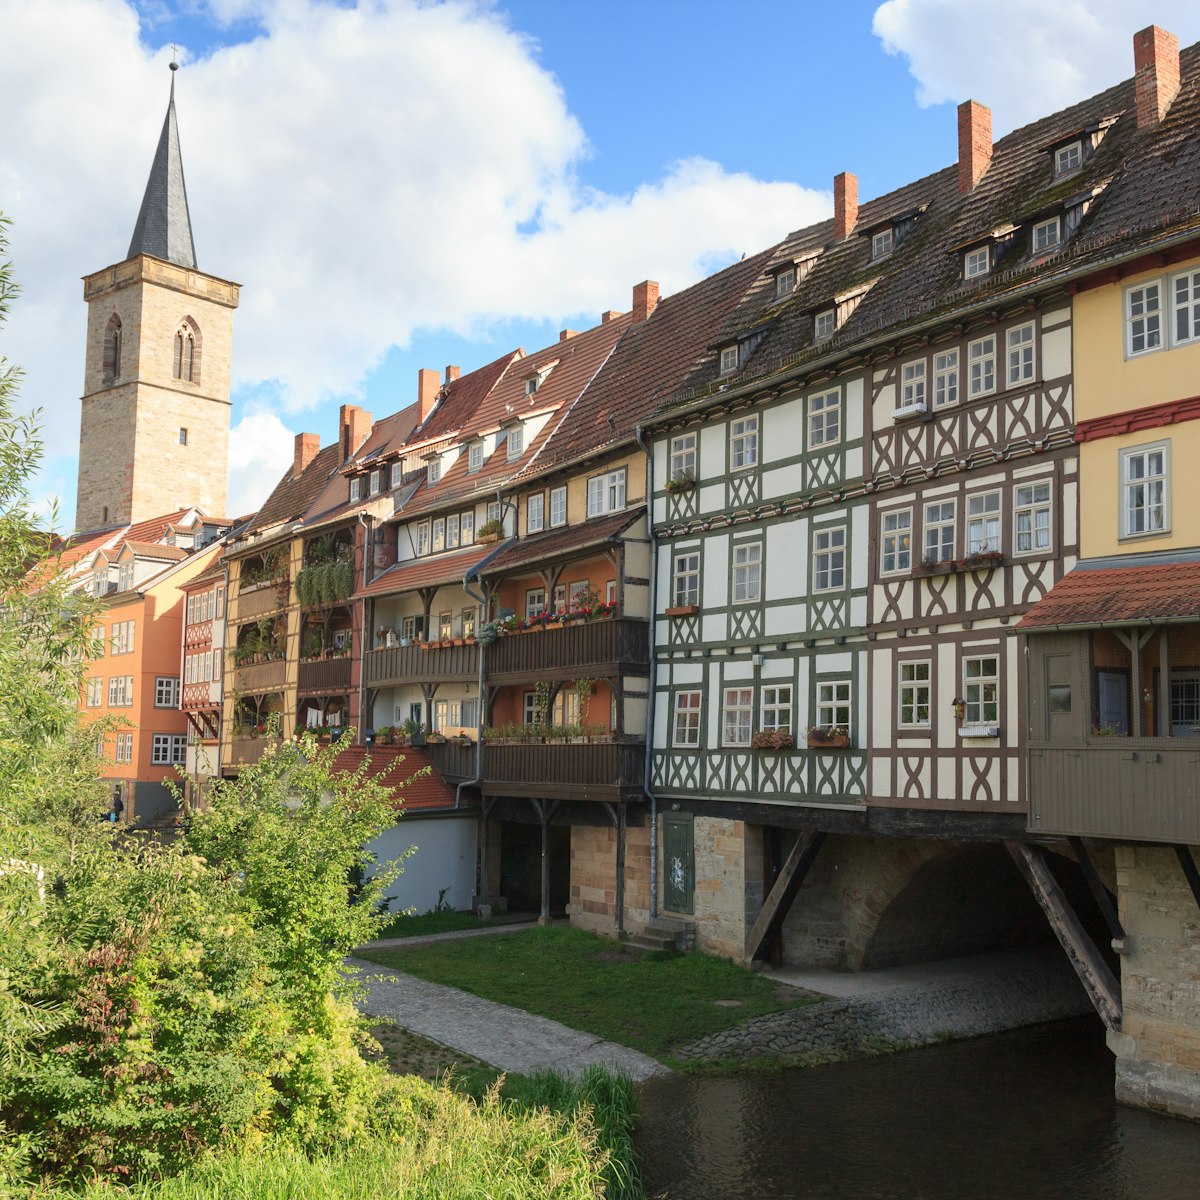 Medieval arch bridge Krämerbrücke crossing river Gera with half-timbered shops and houses in the city of Erfurt, Germany.